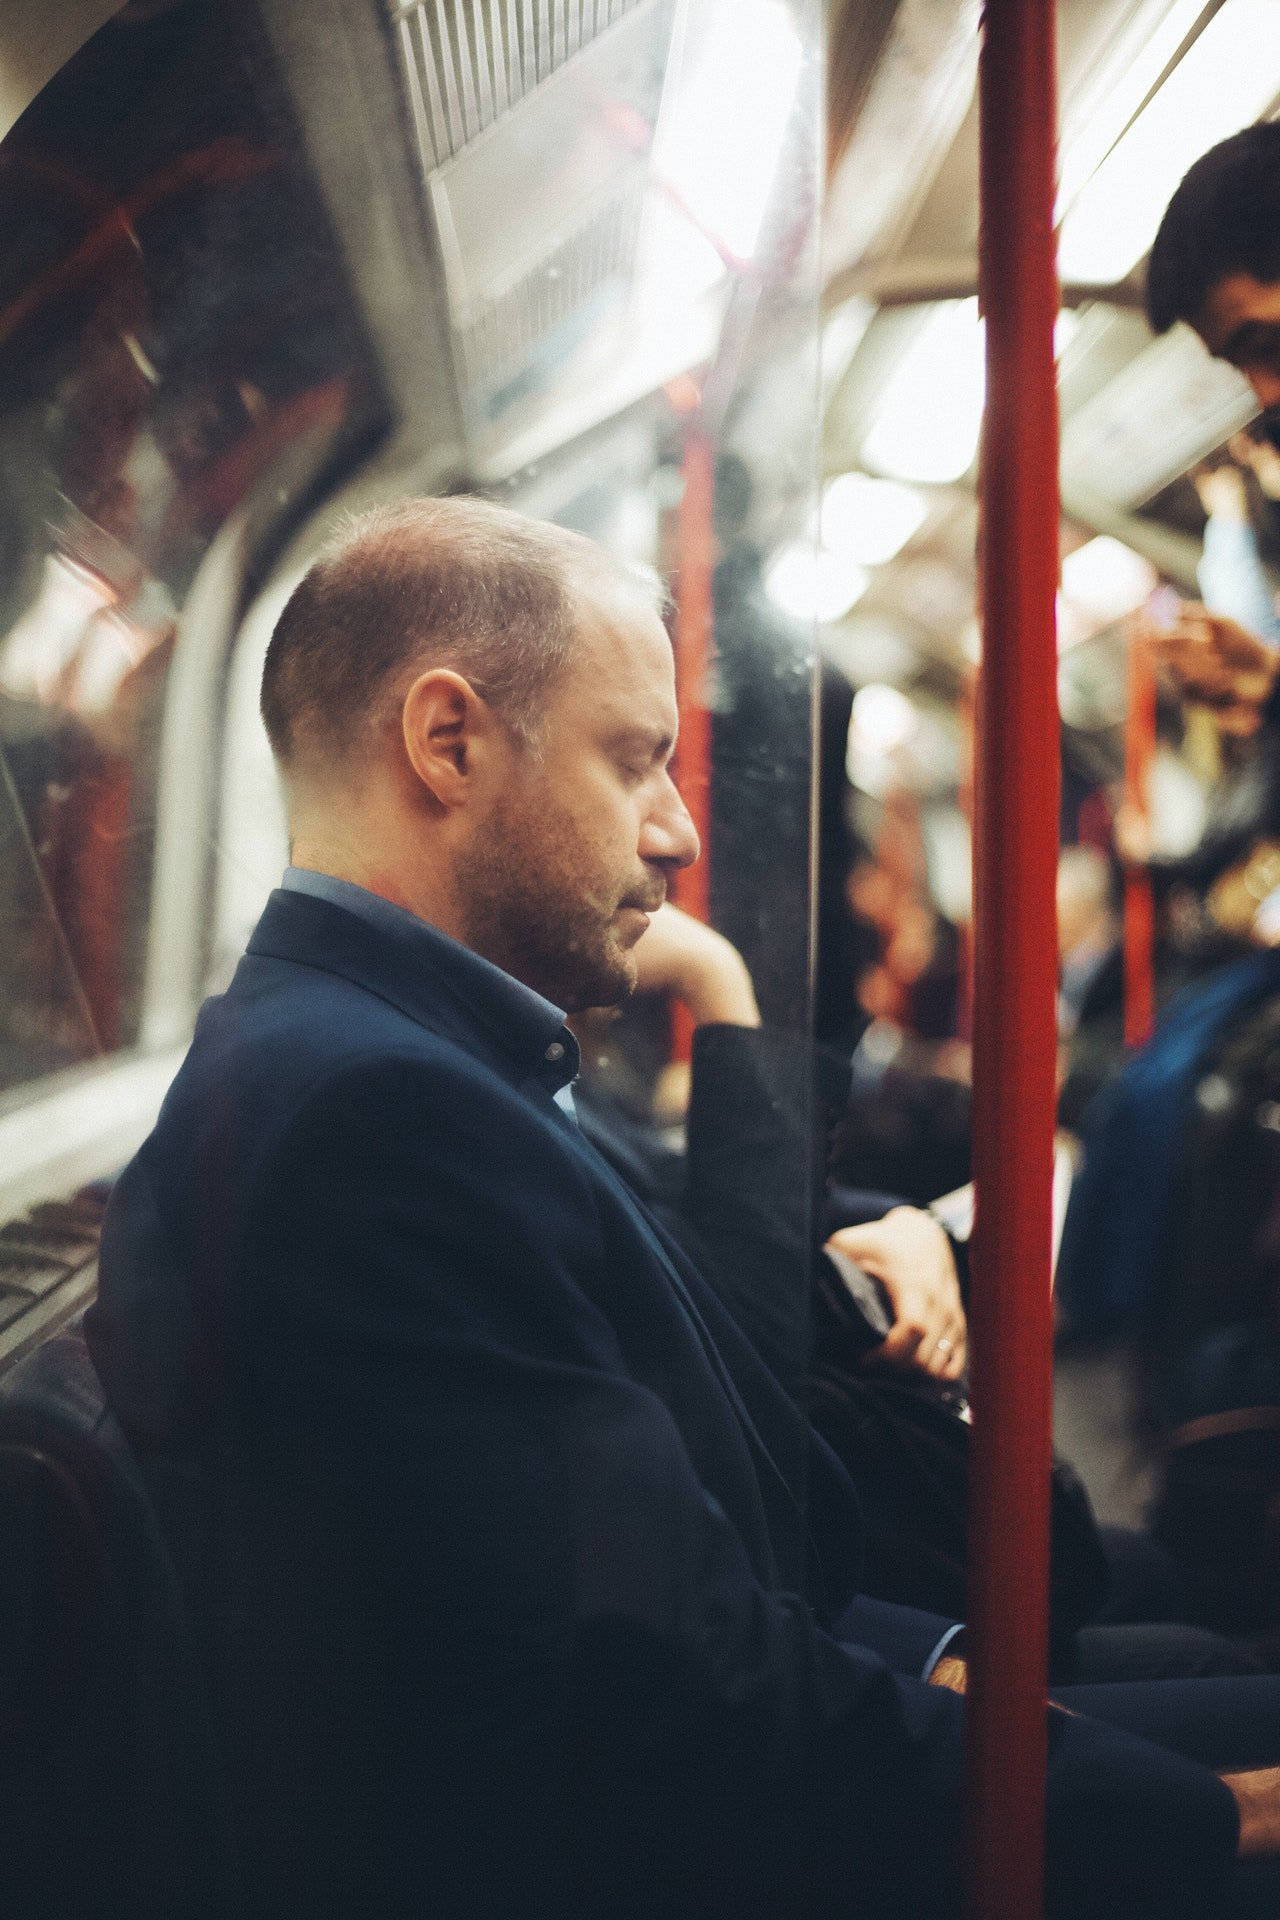 Photo of a man sleeping in a train | Photo: Pexels